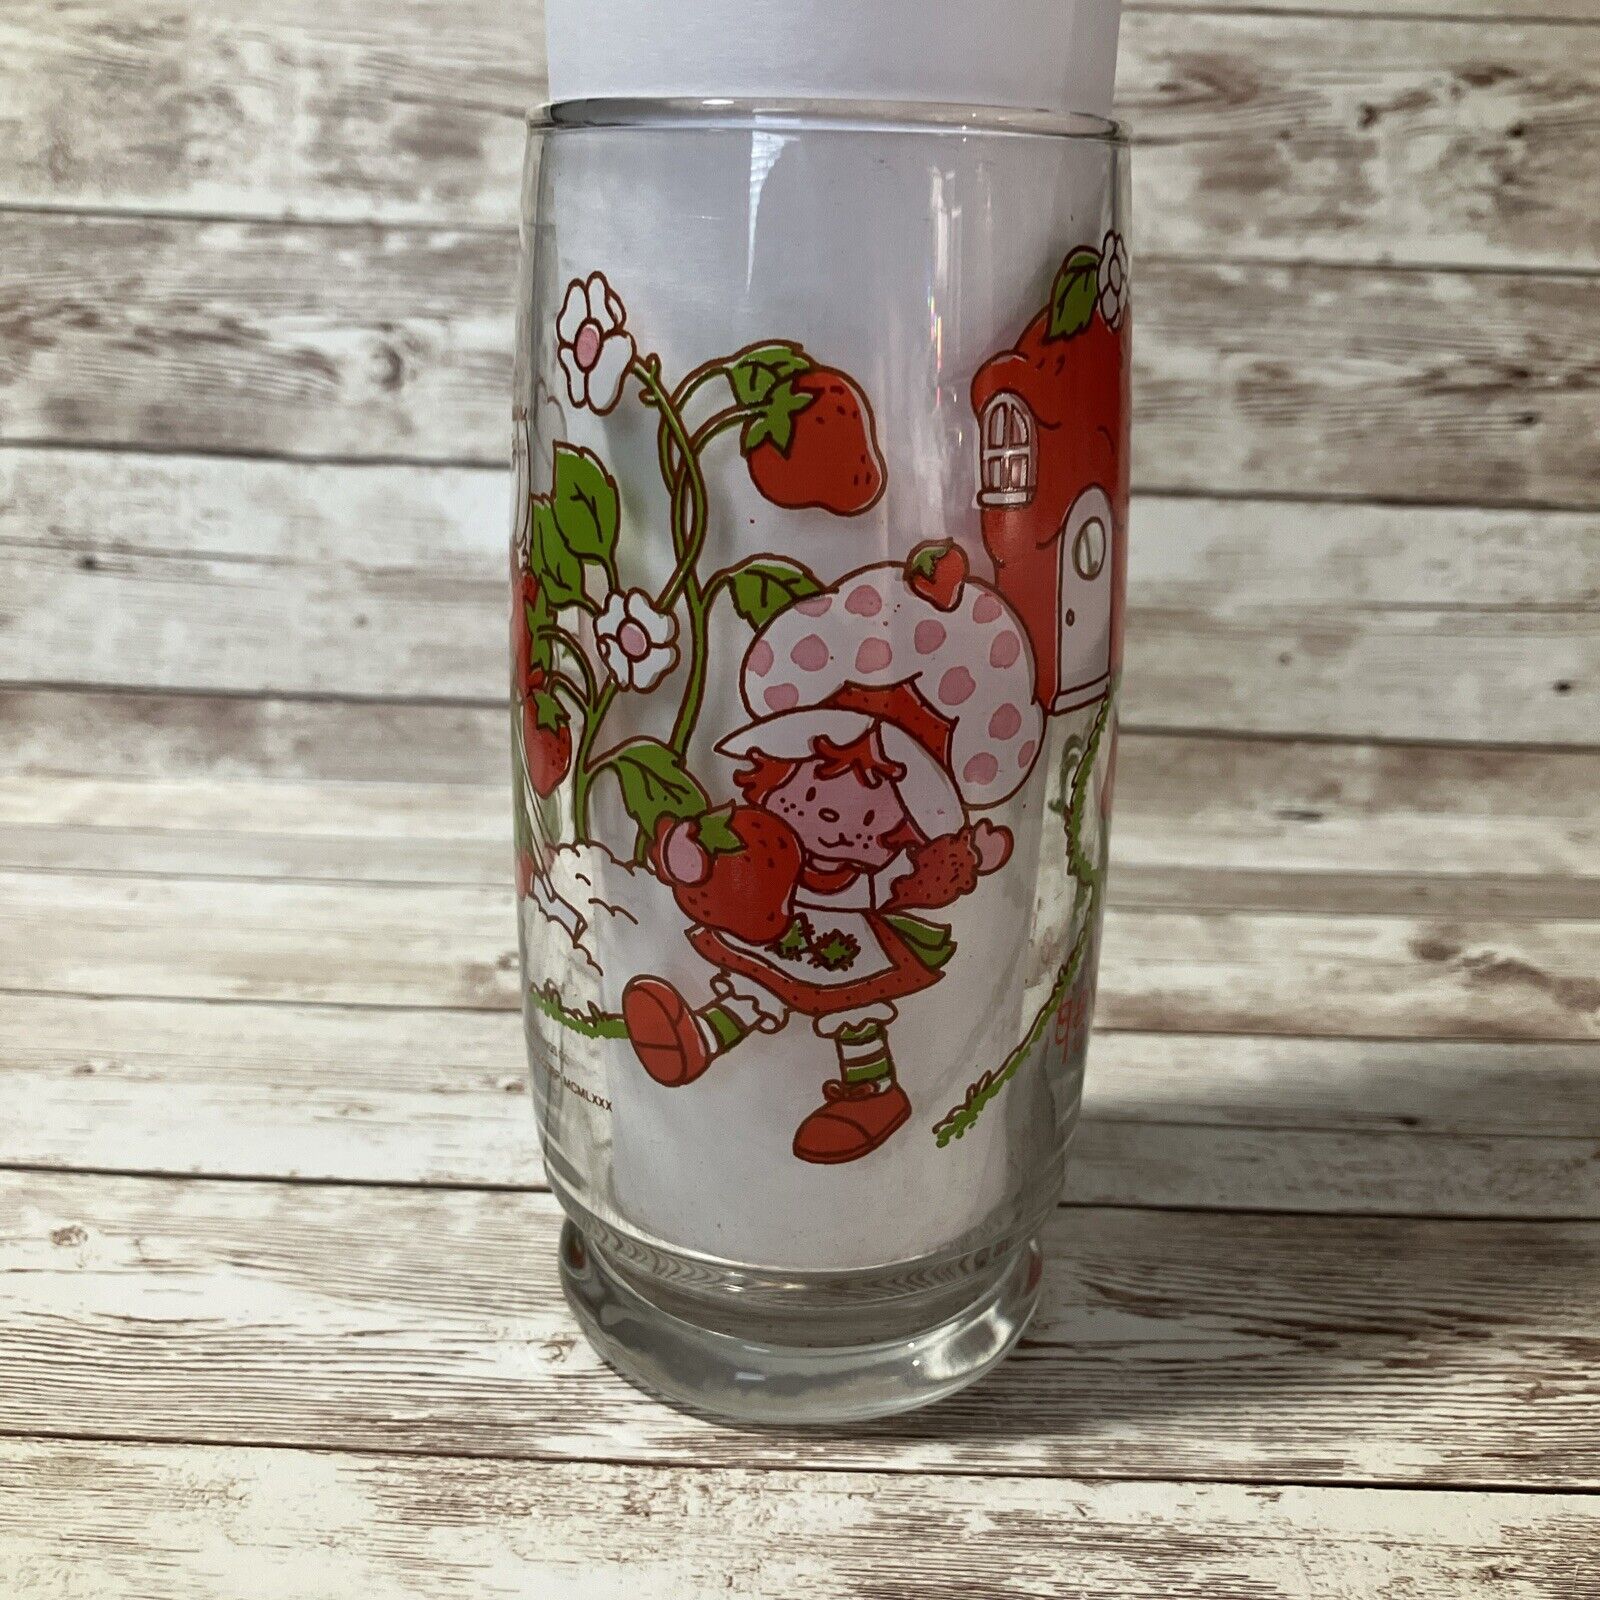 Strawberry Shortcake American Greetings Vintage 1980s Drinking Glass 6” Tall